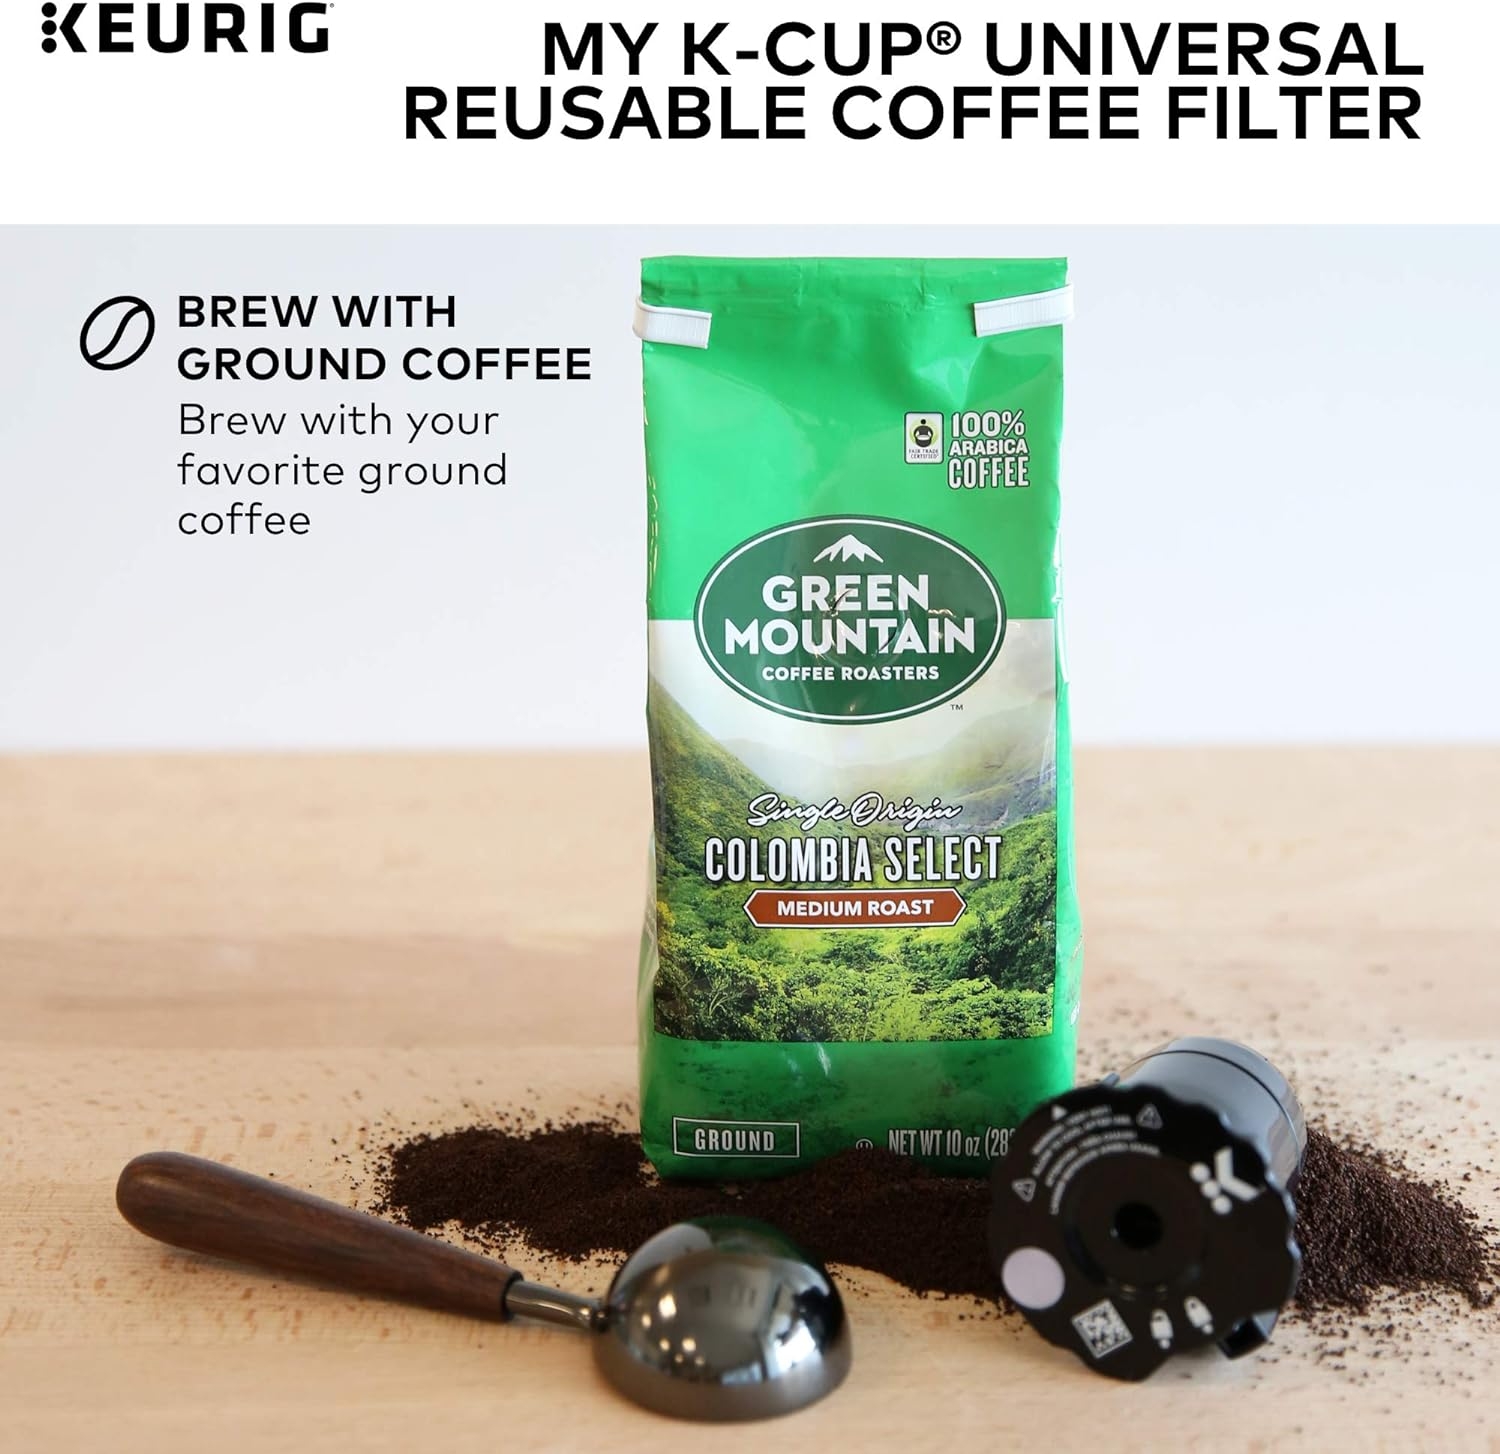 Keurig My K-Cup Universal Reusable K-Cup Pod Coffee Filter, Compatible with All 2.0 Keurig K-Cup Pod Coffee Makers, 1 Count, Black